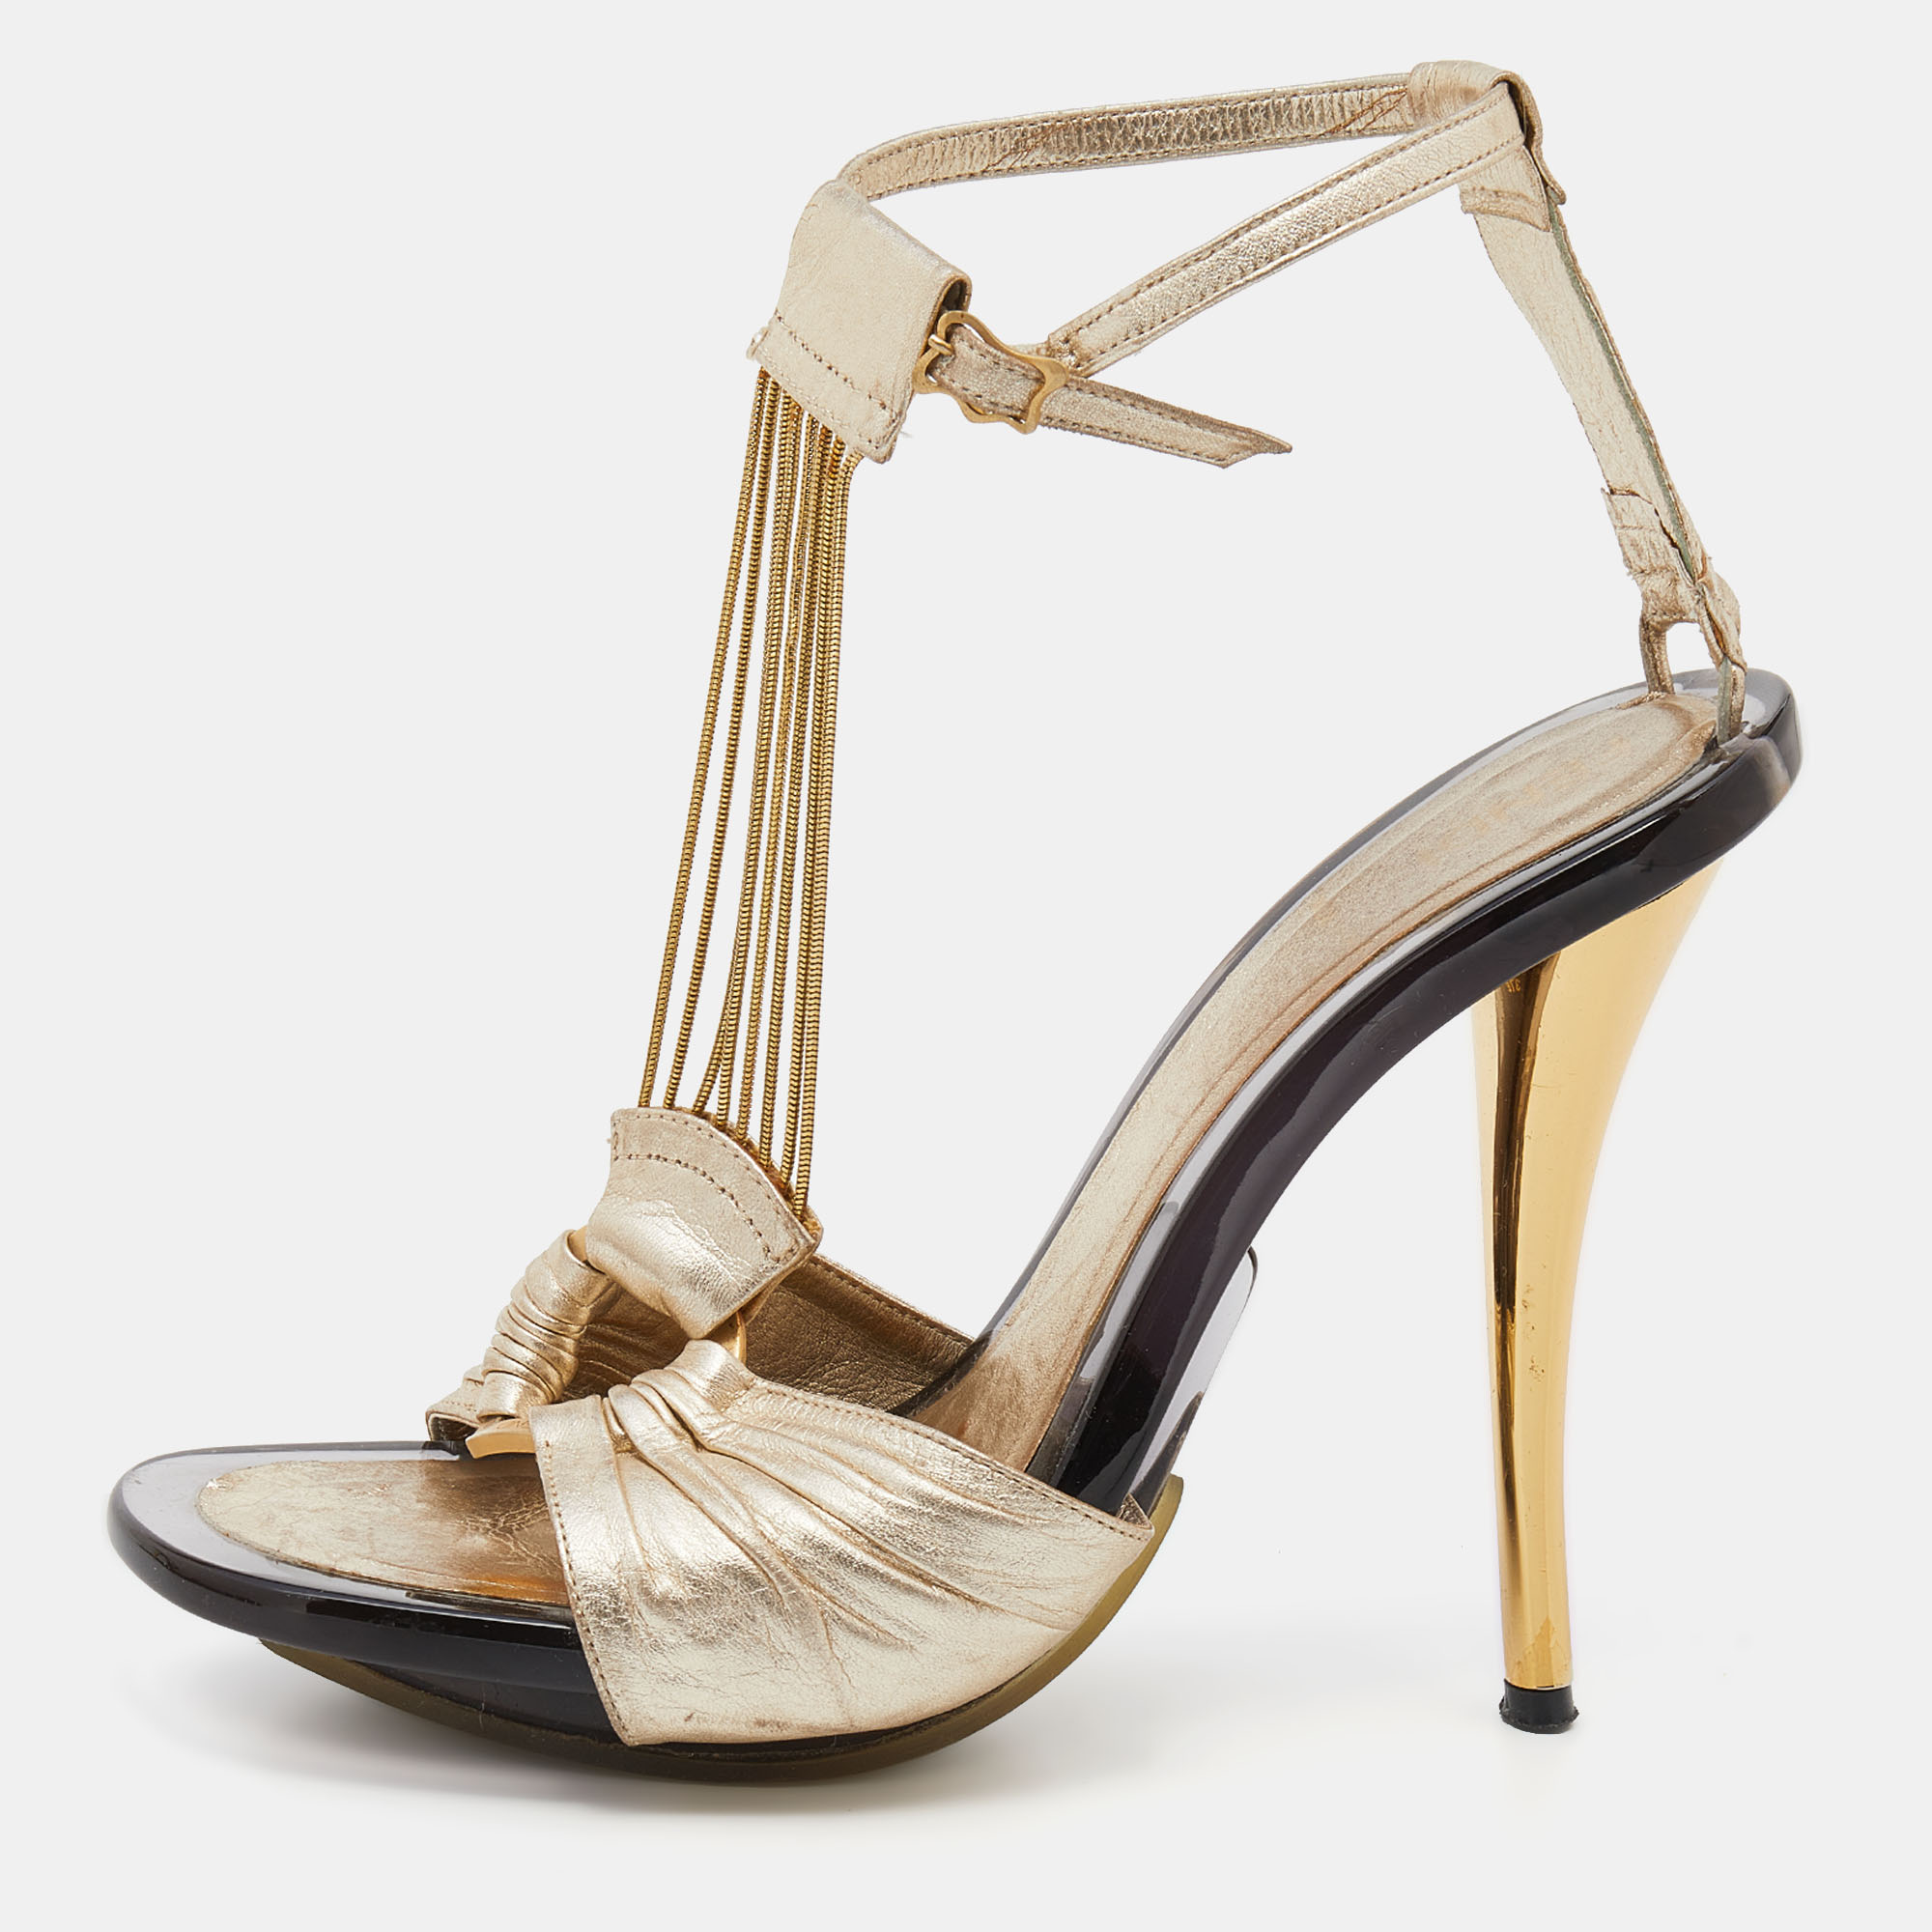 Pre-owned Fendi Metallic Gold Leather Ankle Strap Sandals Size 37.5